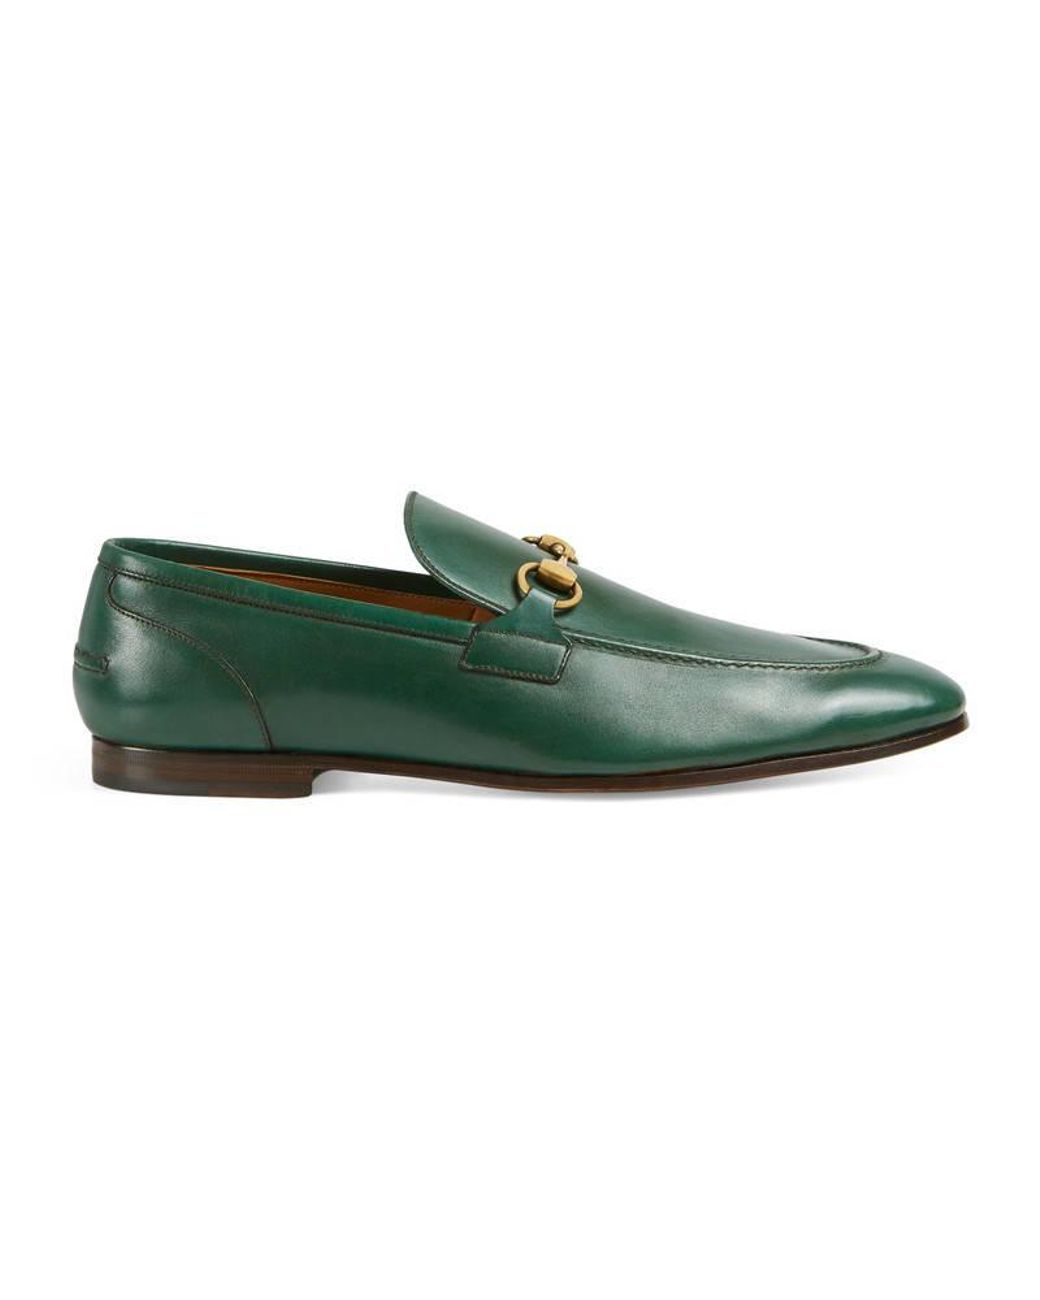 Gucci Leather Penny Loafers - Farfetch